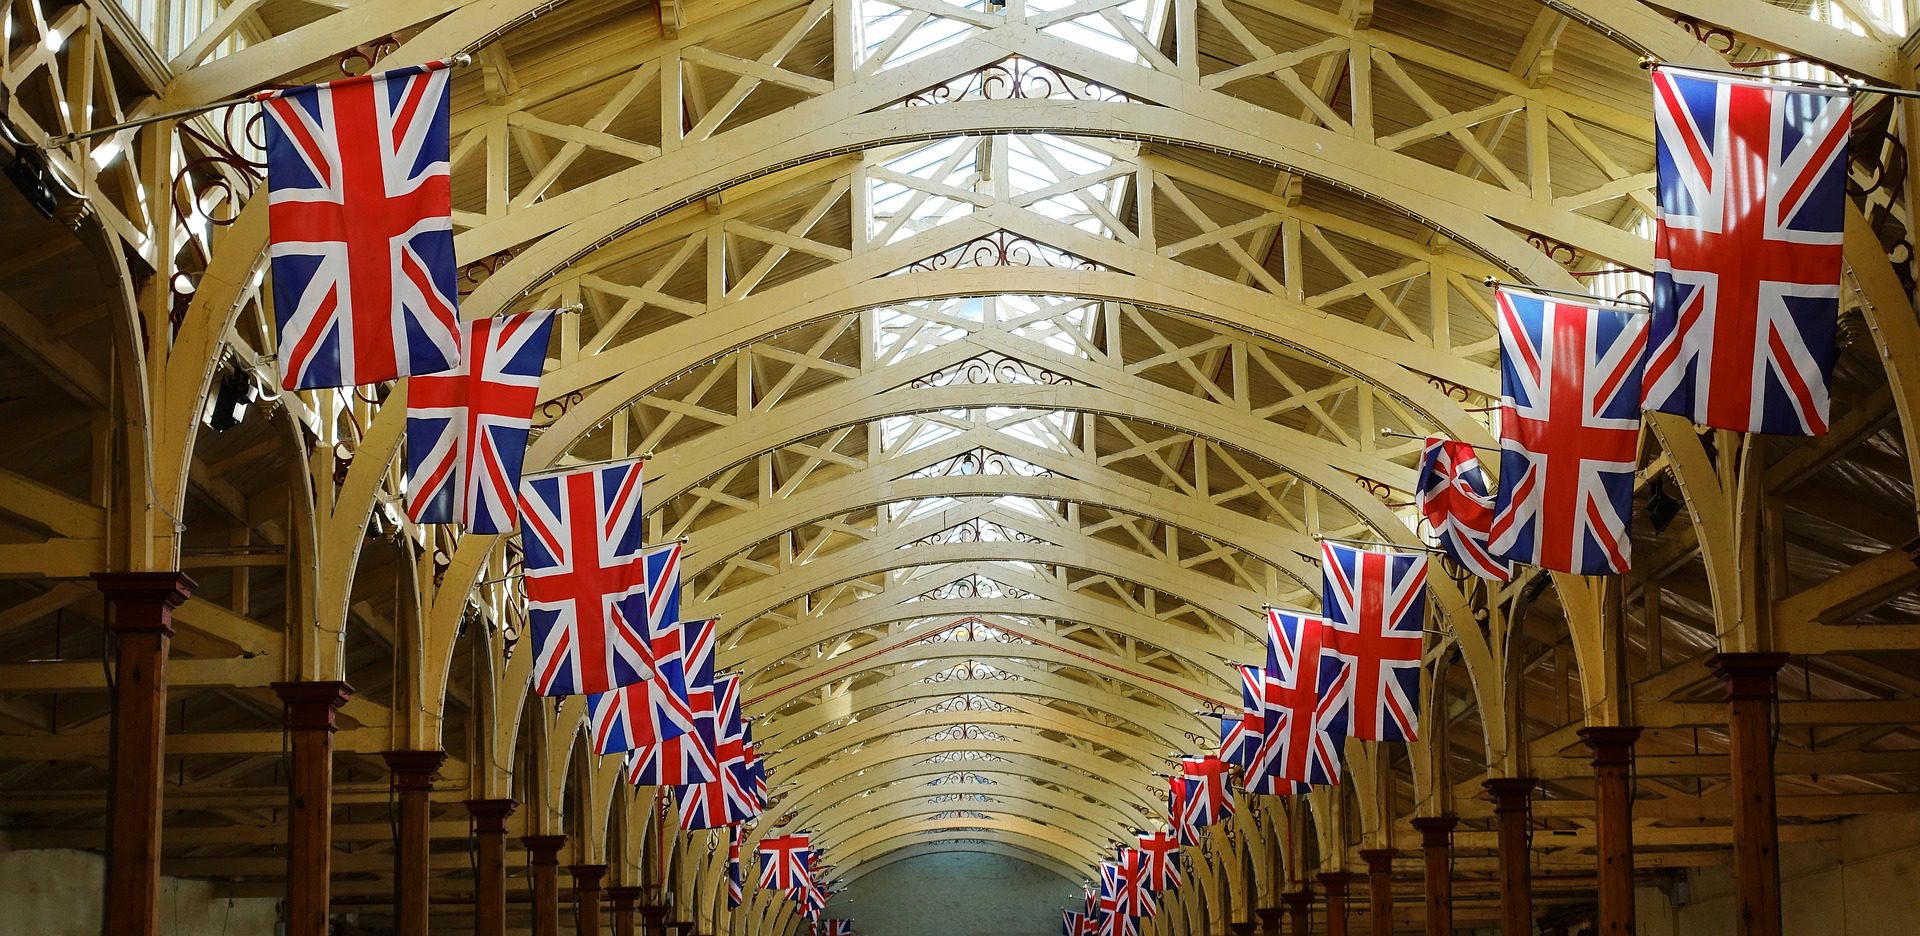 Union Jack flags hanging from an arched ceiling